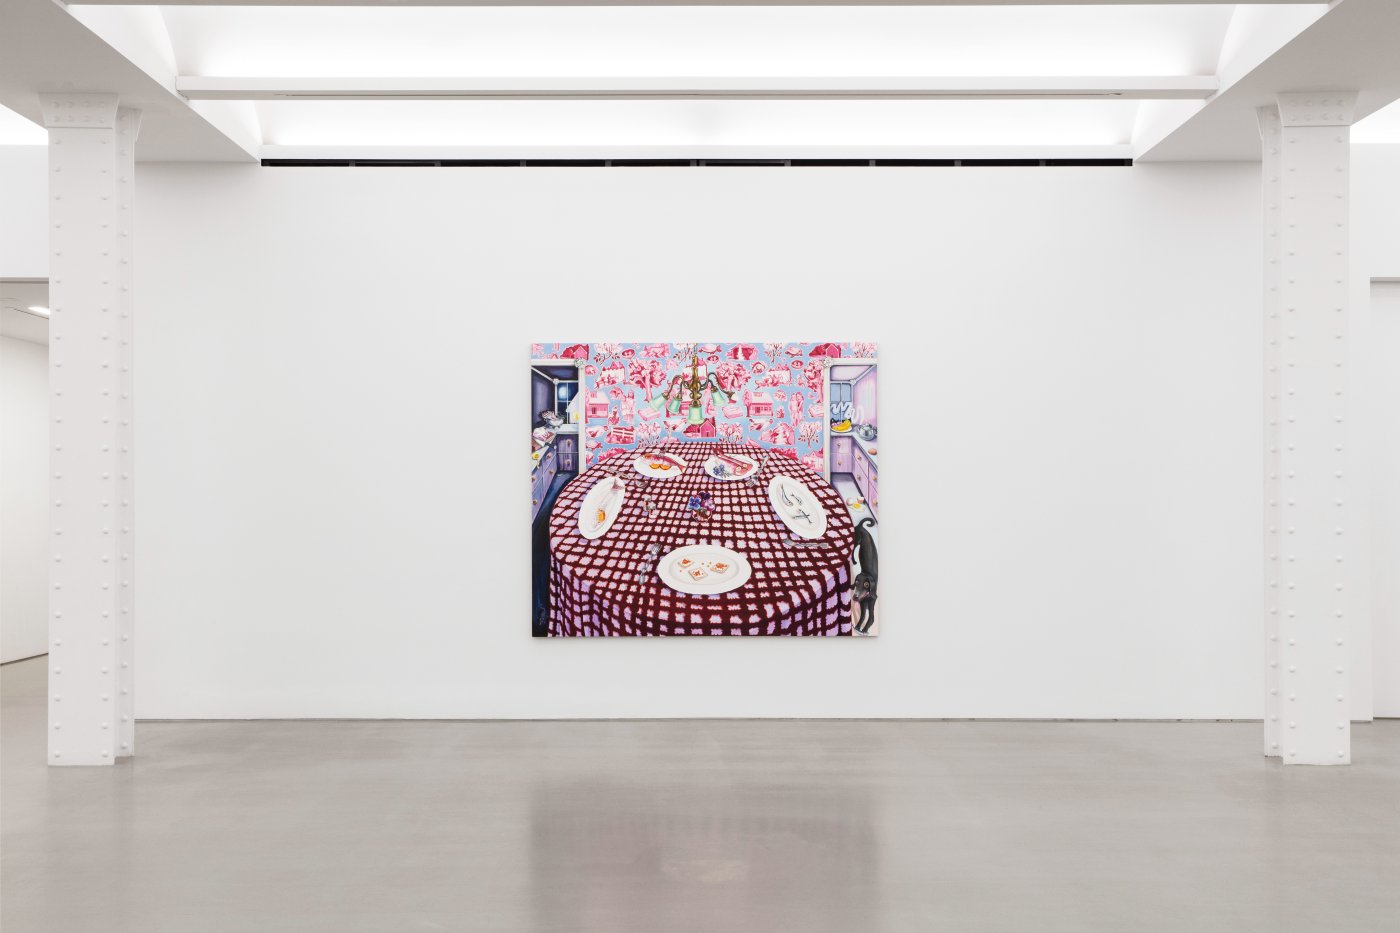 Installation image for Nikki Maloof: Skunk Hour, at Perrotin